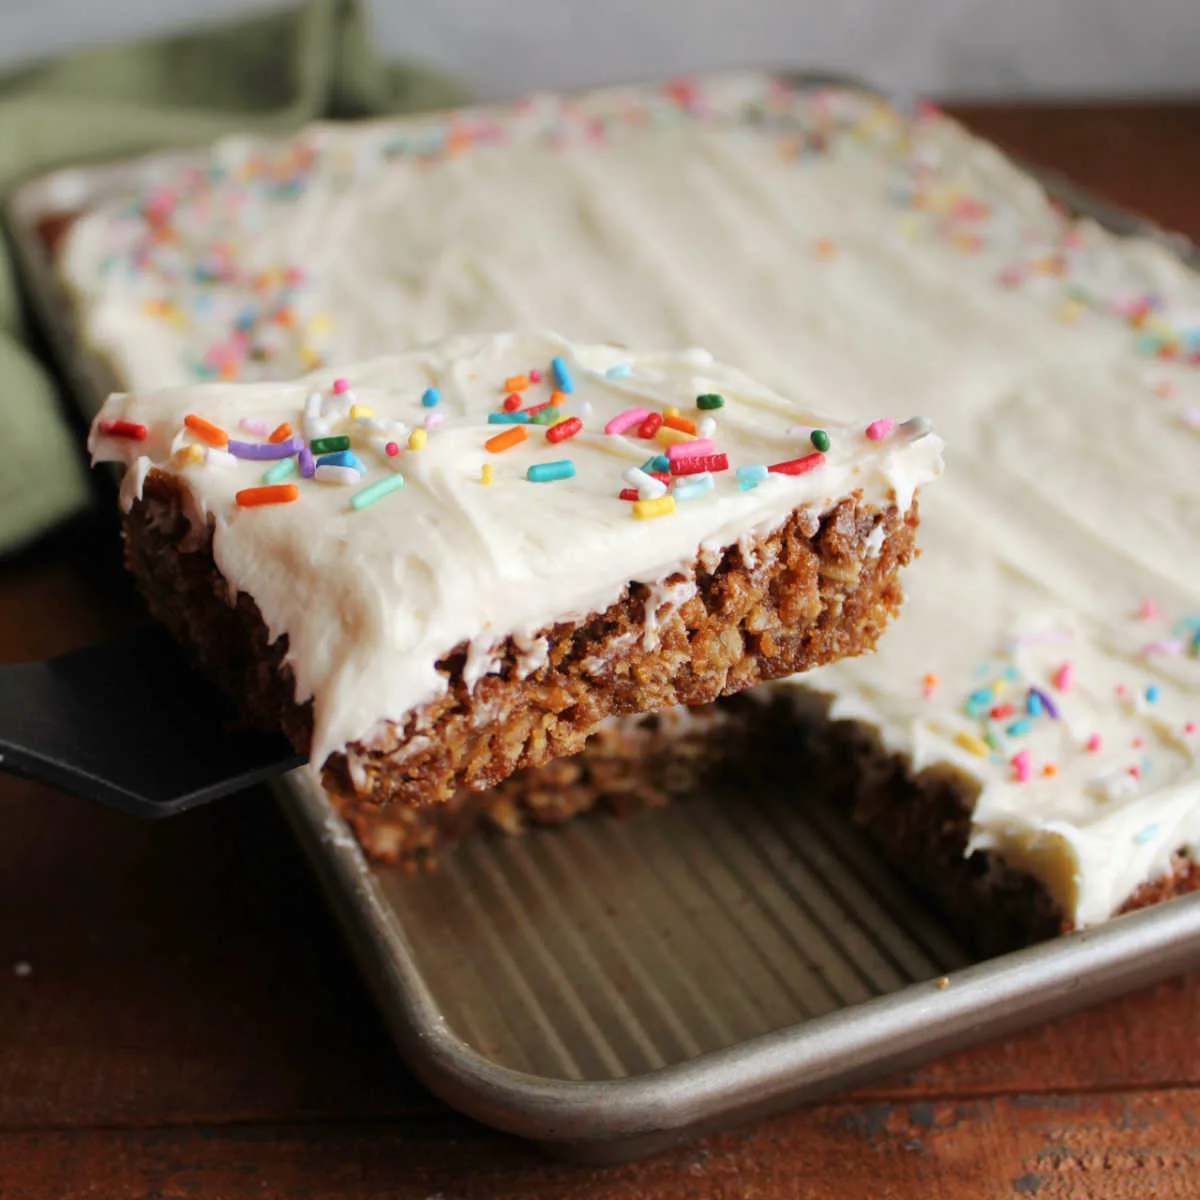 This image shows the oatmeal cream pie bars in the baking pan, with one bar being lifted by a spatula, ready to serve. 